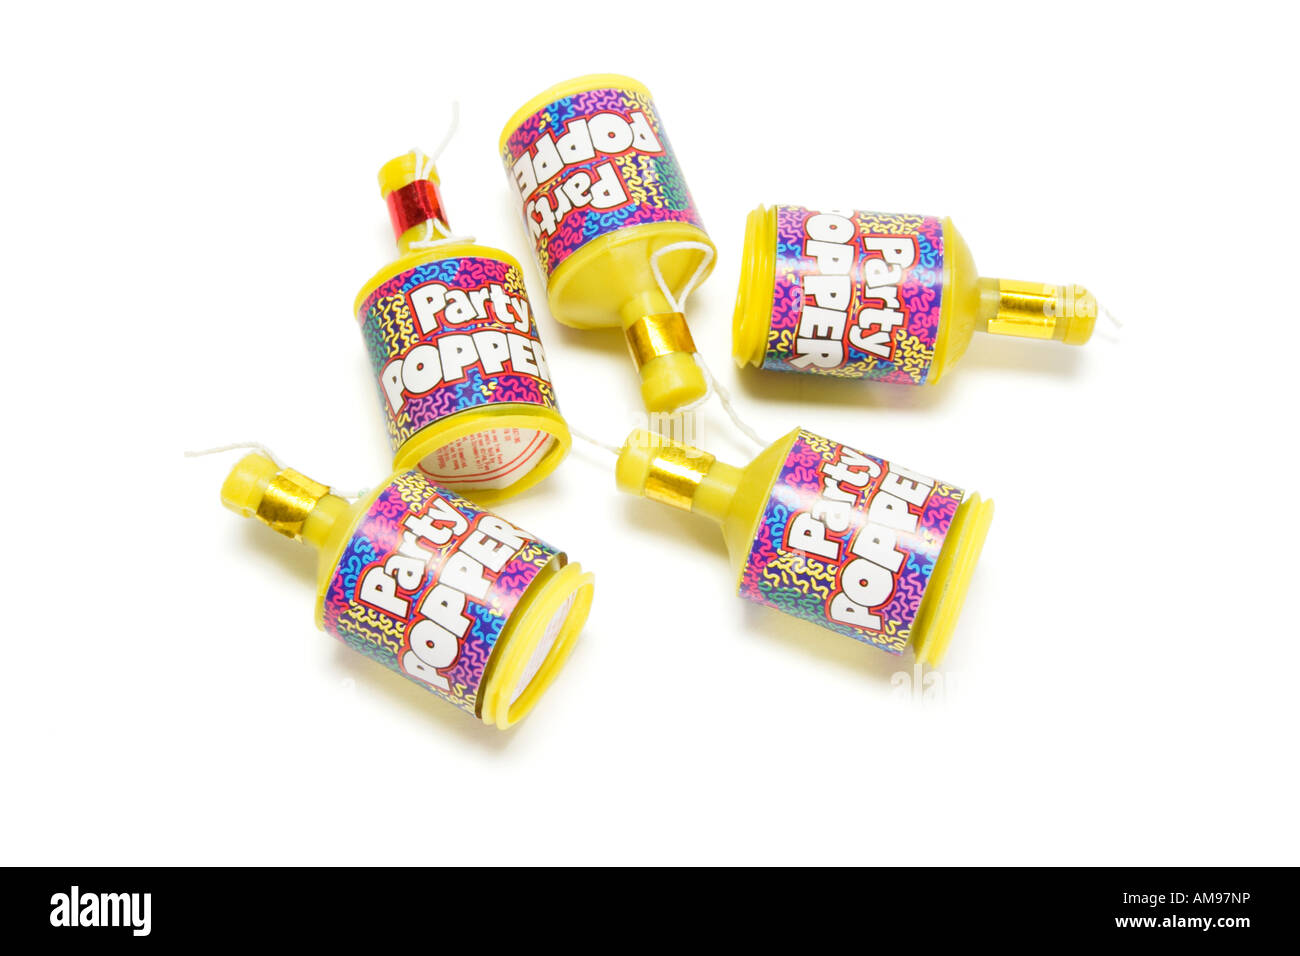 Party Poppers on White Background Stock Photo